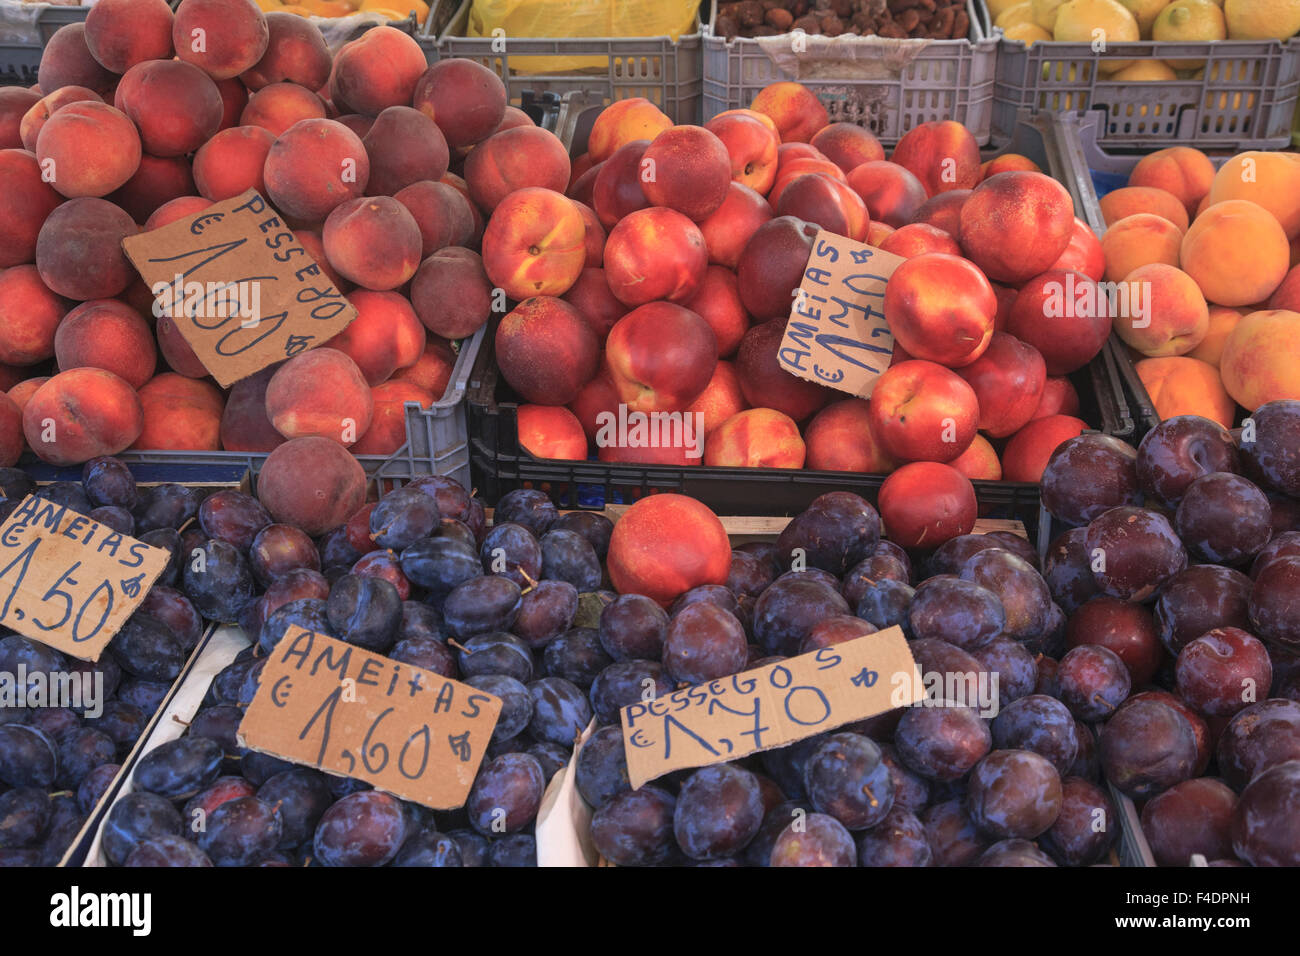 Fruits in baskets for sale at open air market in Portuguese town. Stock Photo